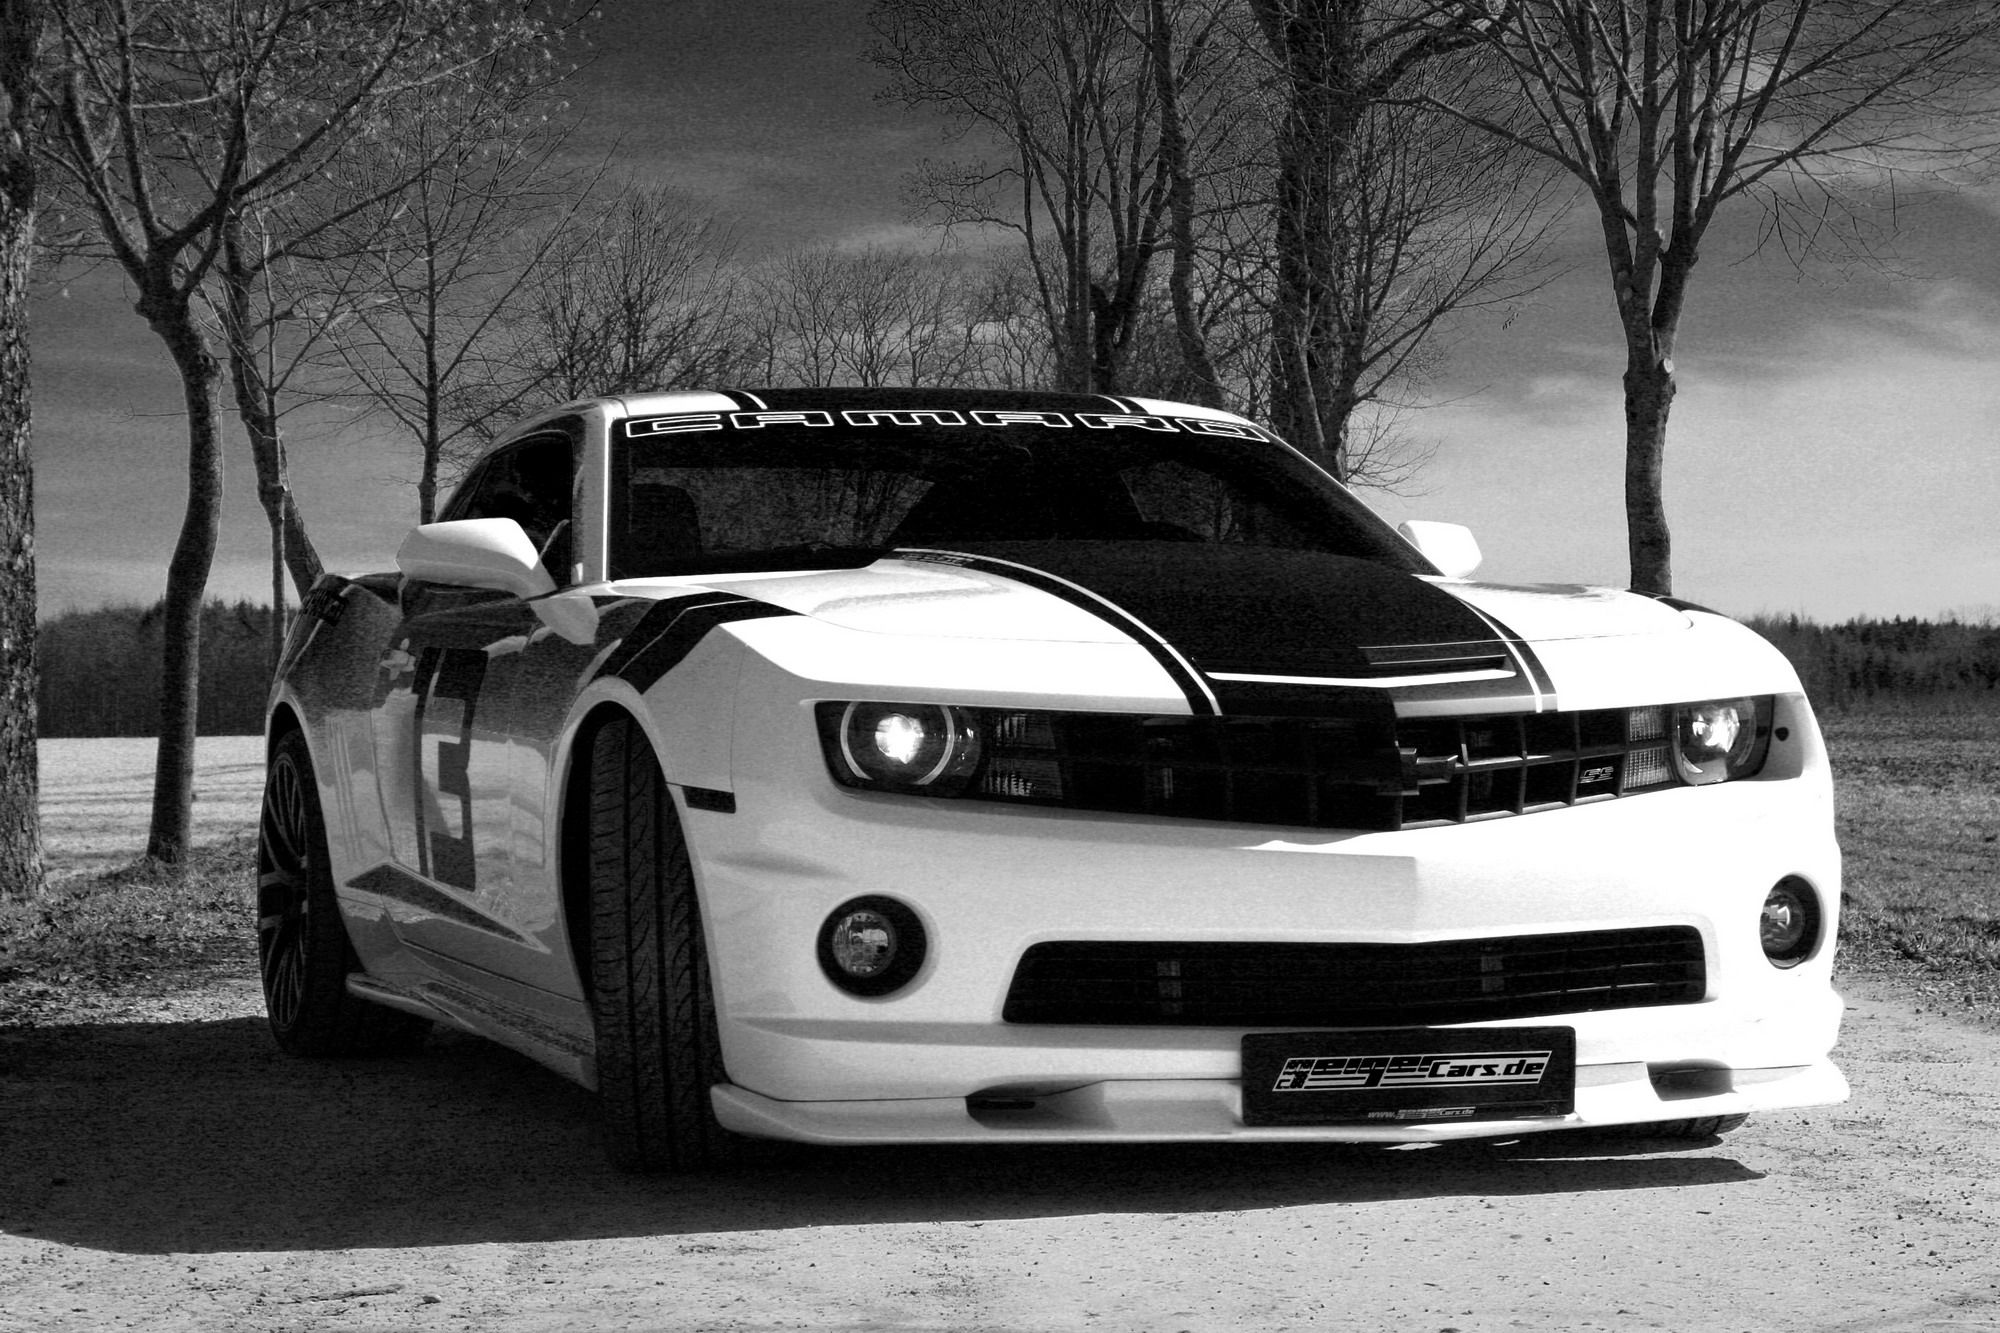 2011 Chevrolet Camaro Super Sport 564 HP by GeigerCars